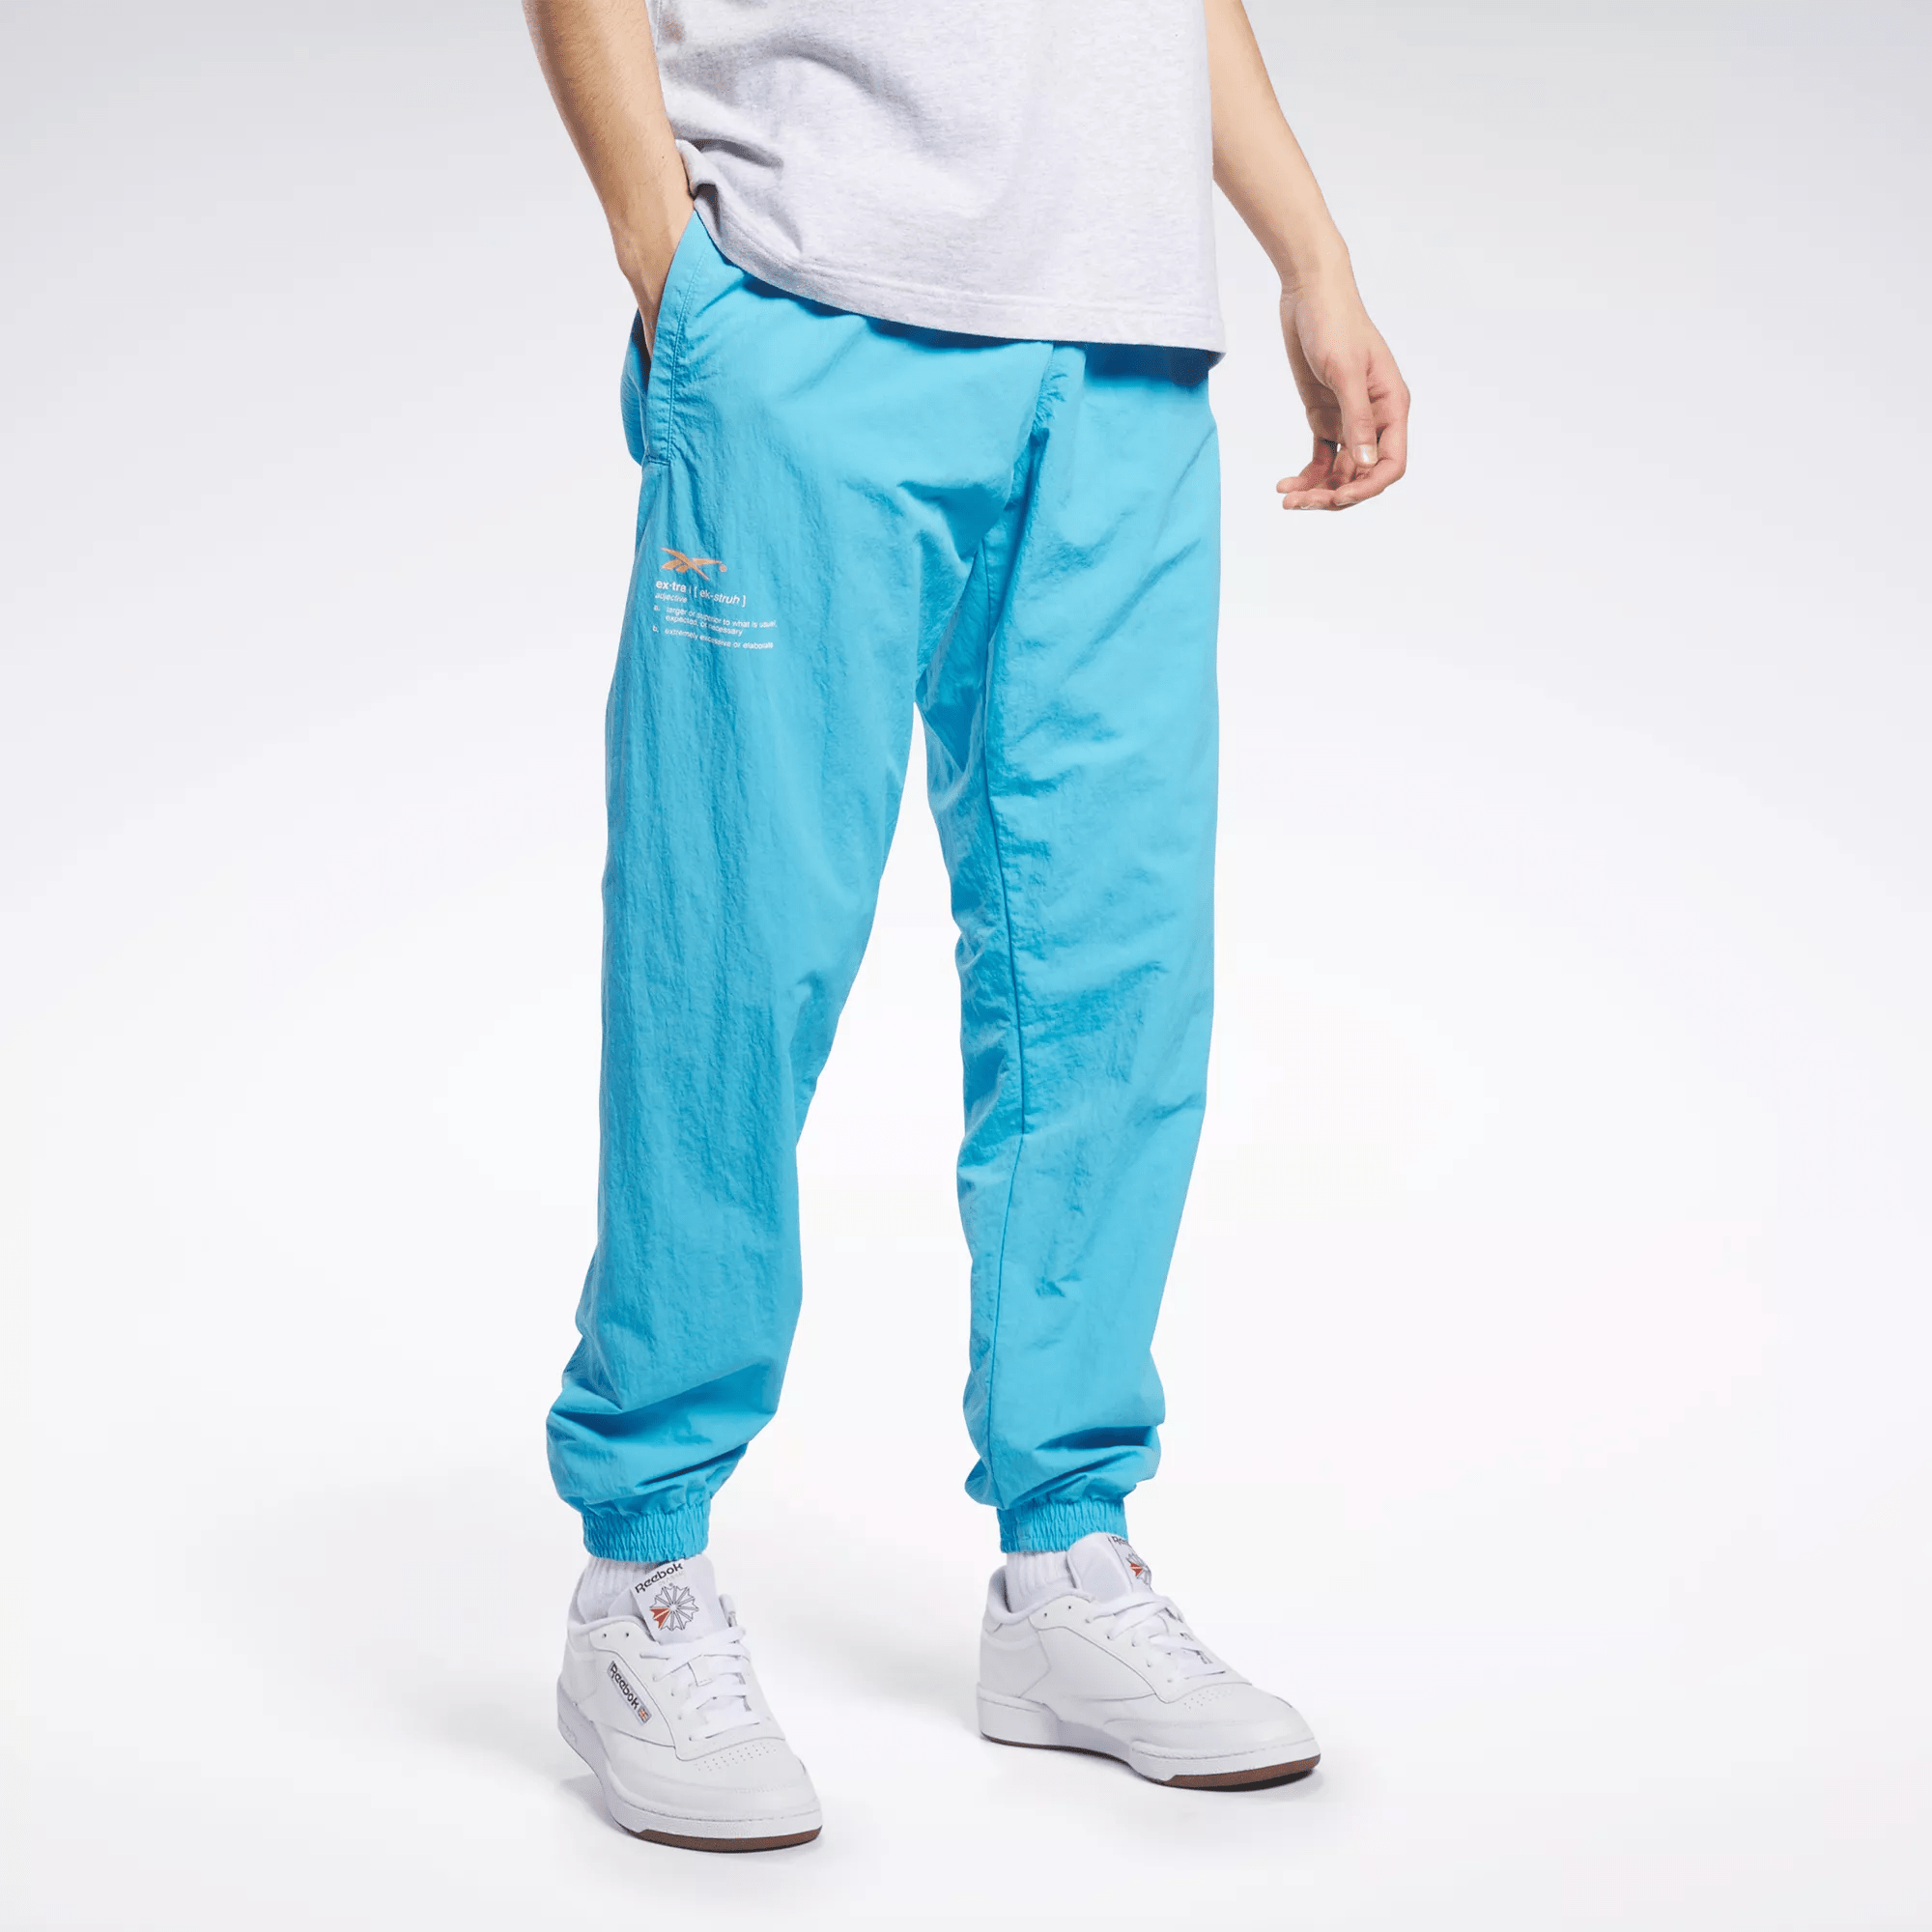 Reebok Most Extra Track Pants In Turquoise